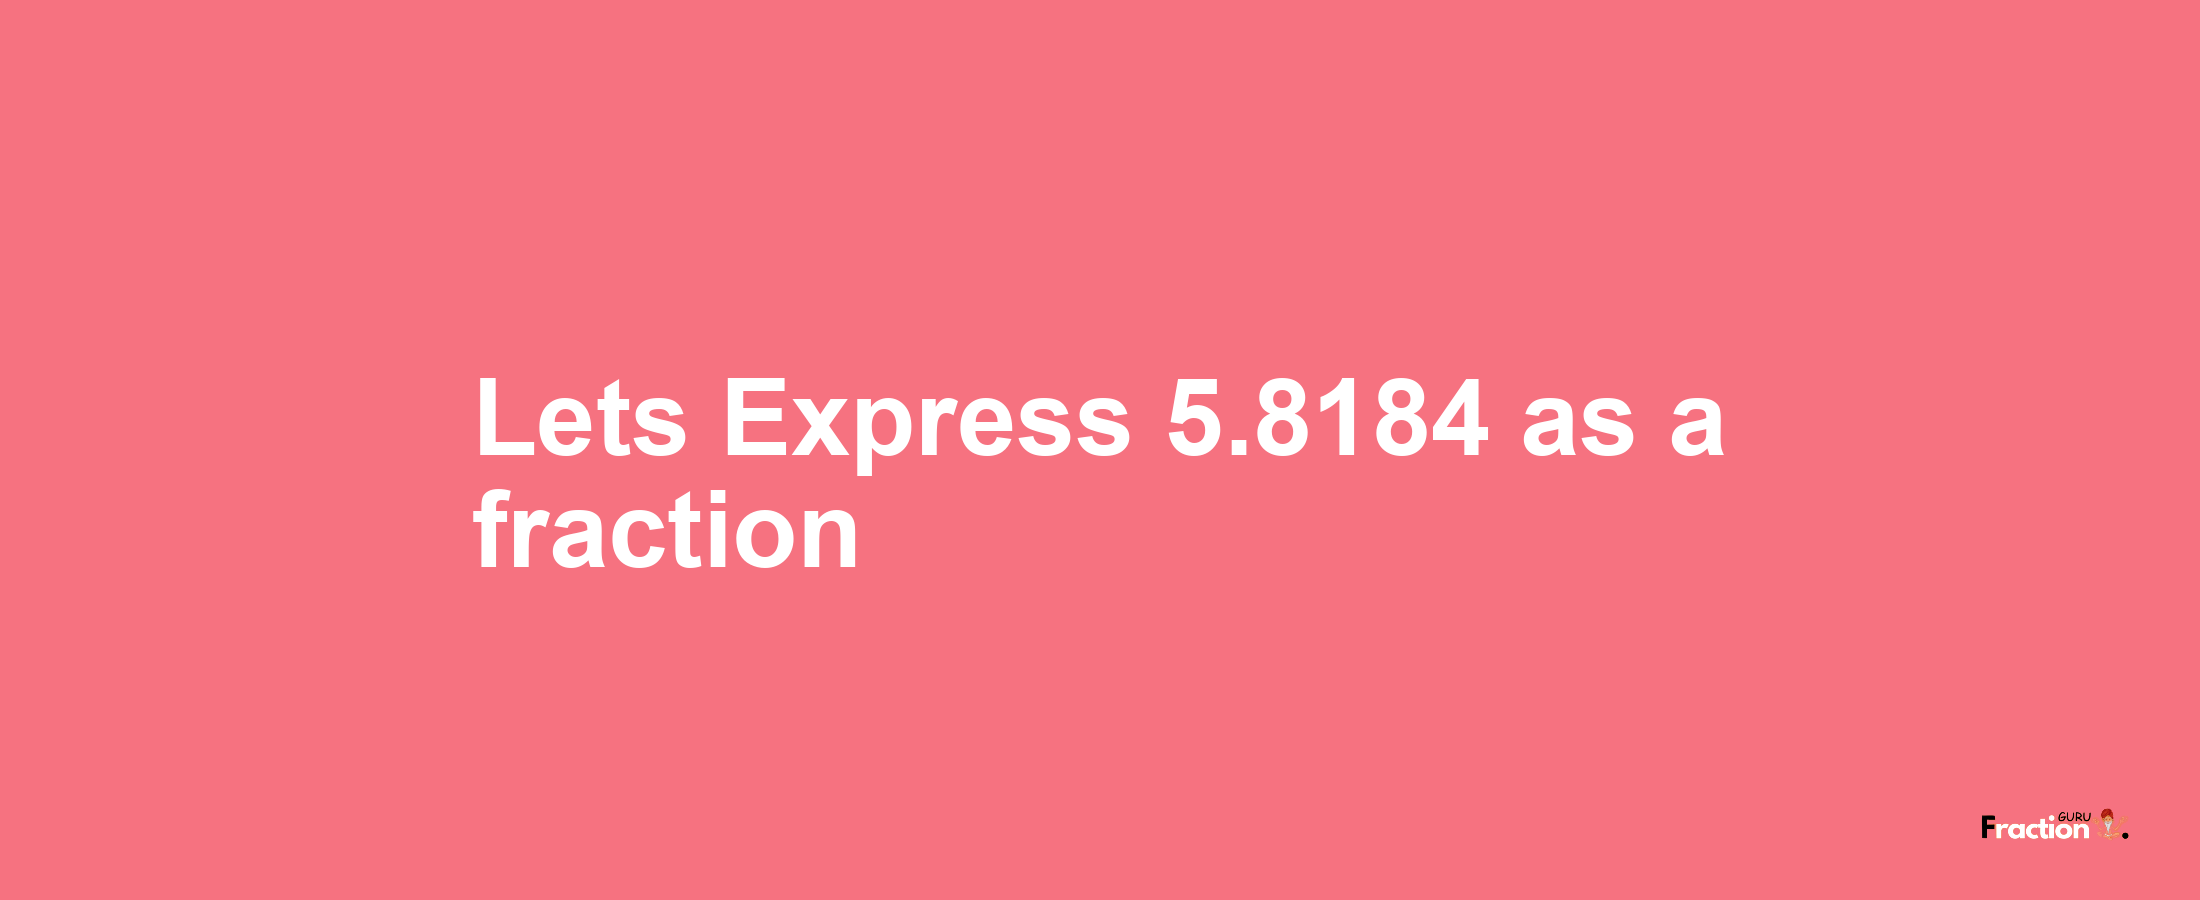 Lets Express 5.8184 as afraction